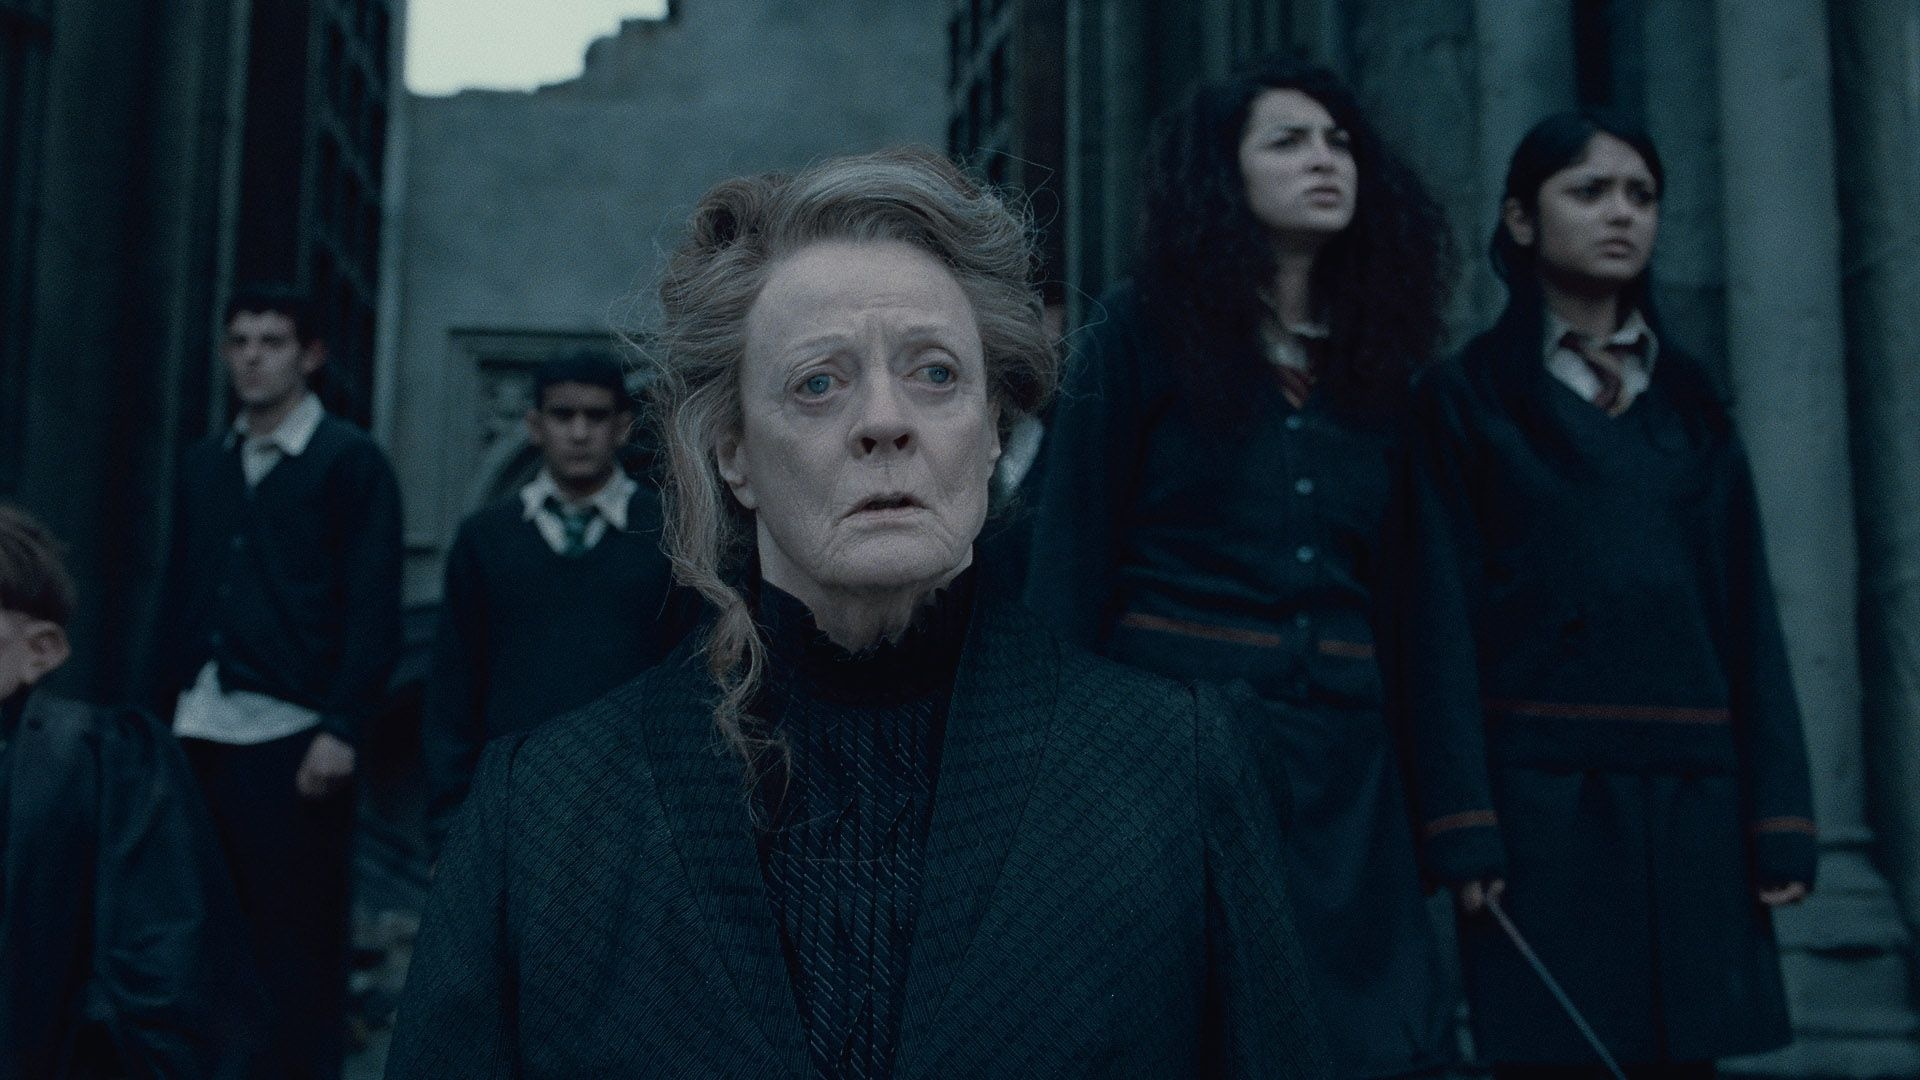 Professor McGonagall movie, Harry Potter wallpapers, Graphics collection, Picture gallery, 1920x1080 Full HD Desktop